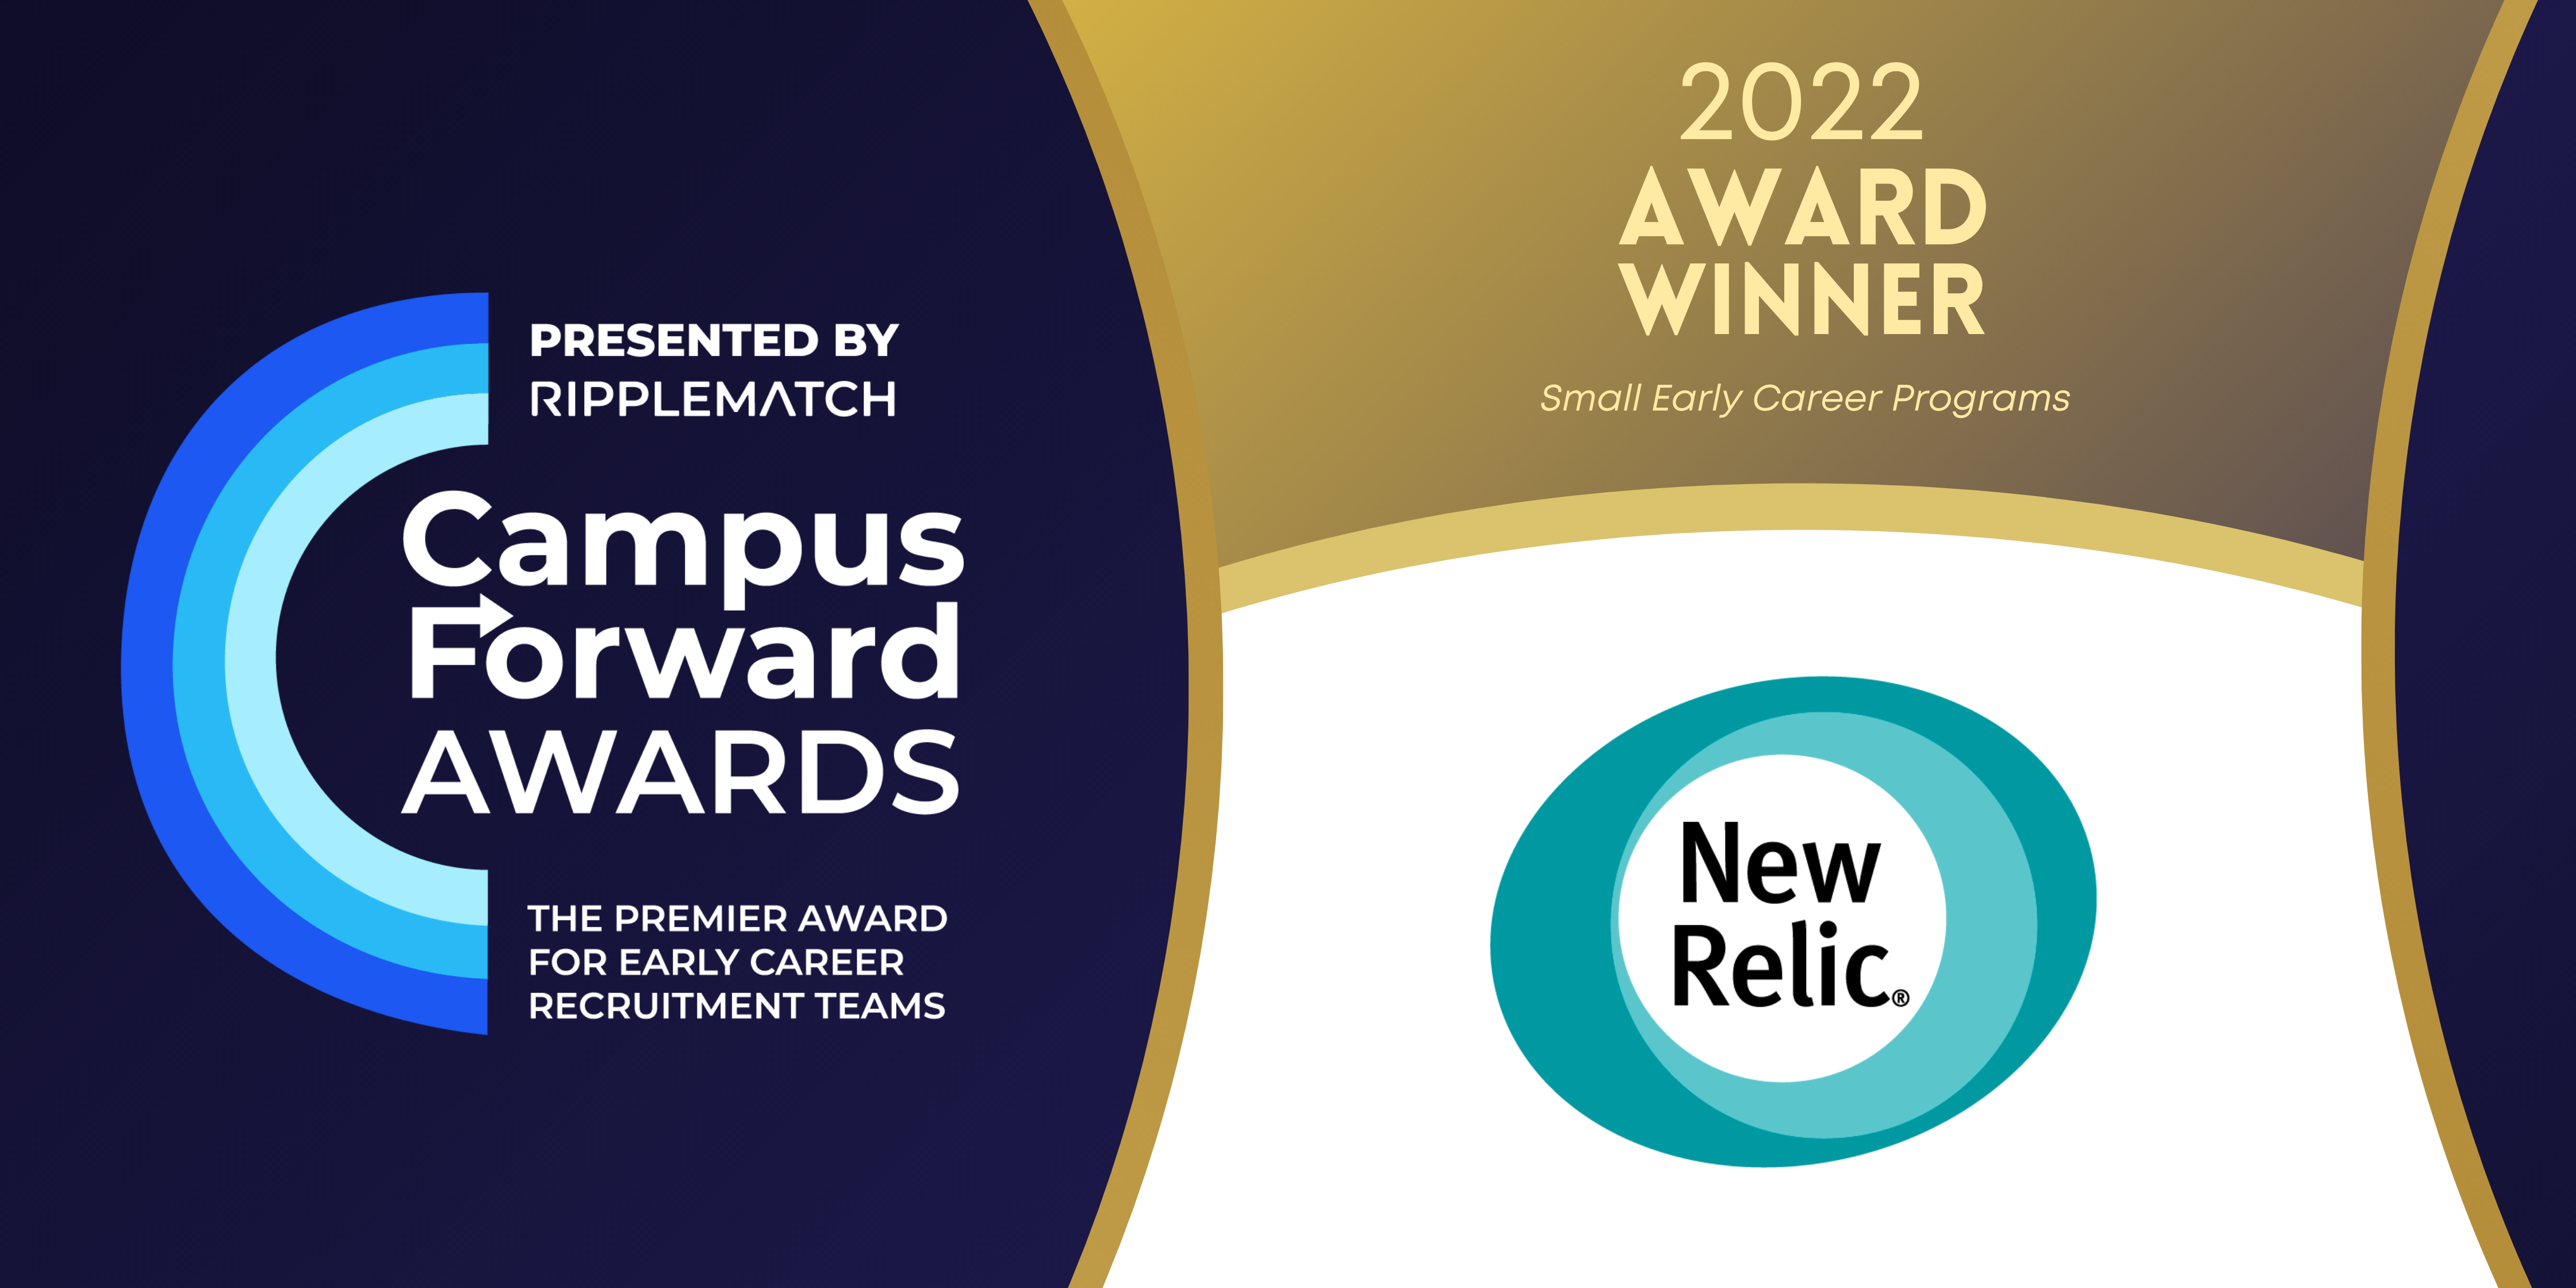 New Relic is a Campus Forward Award Winner 2022